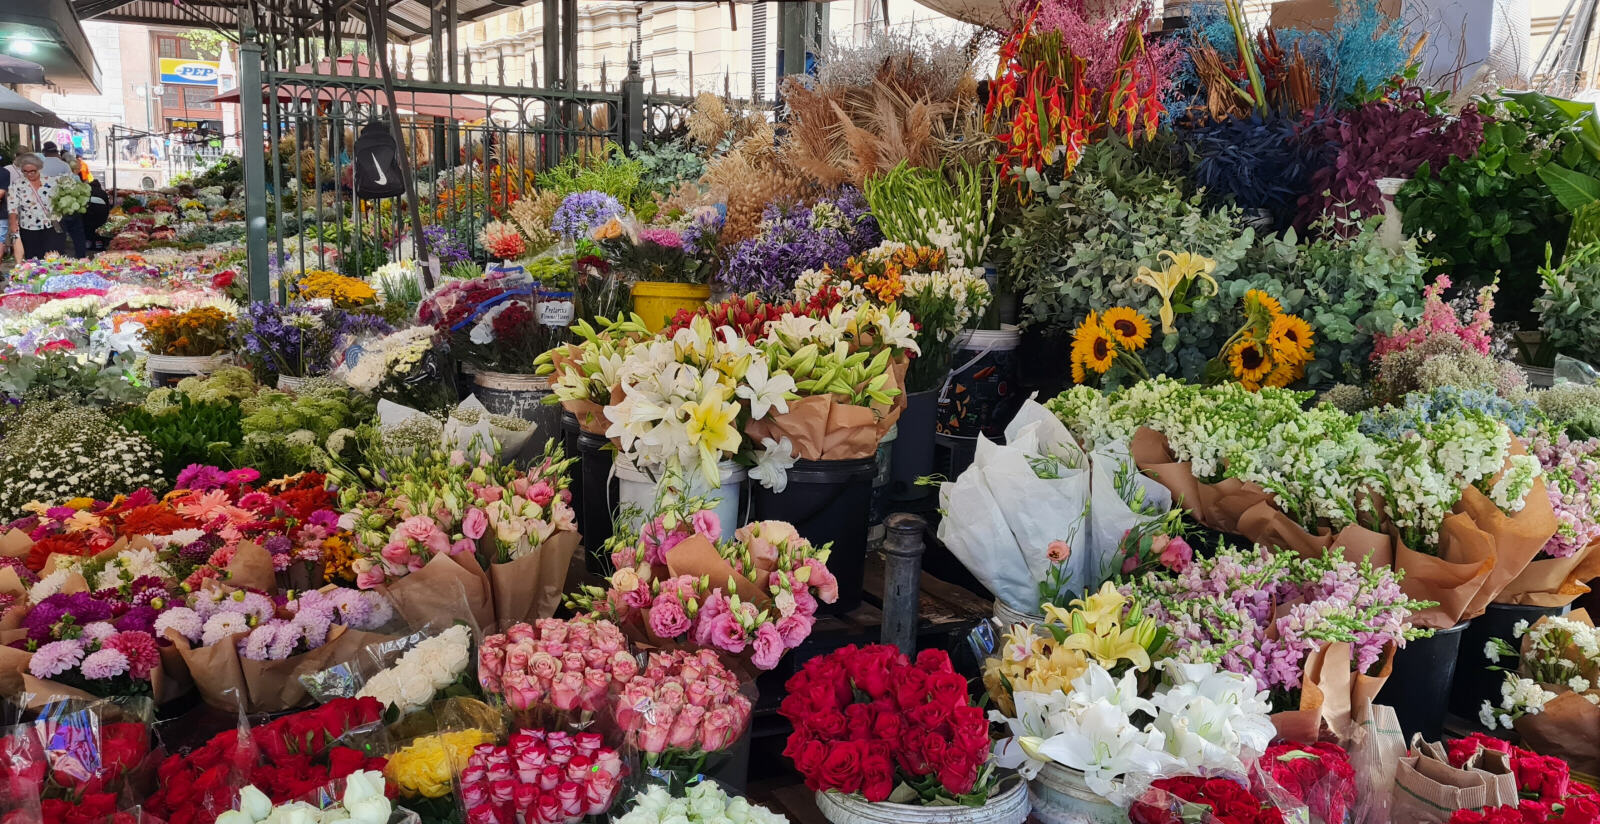 The flower market in Cape Town